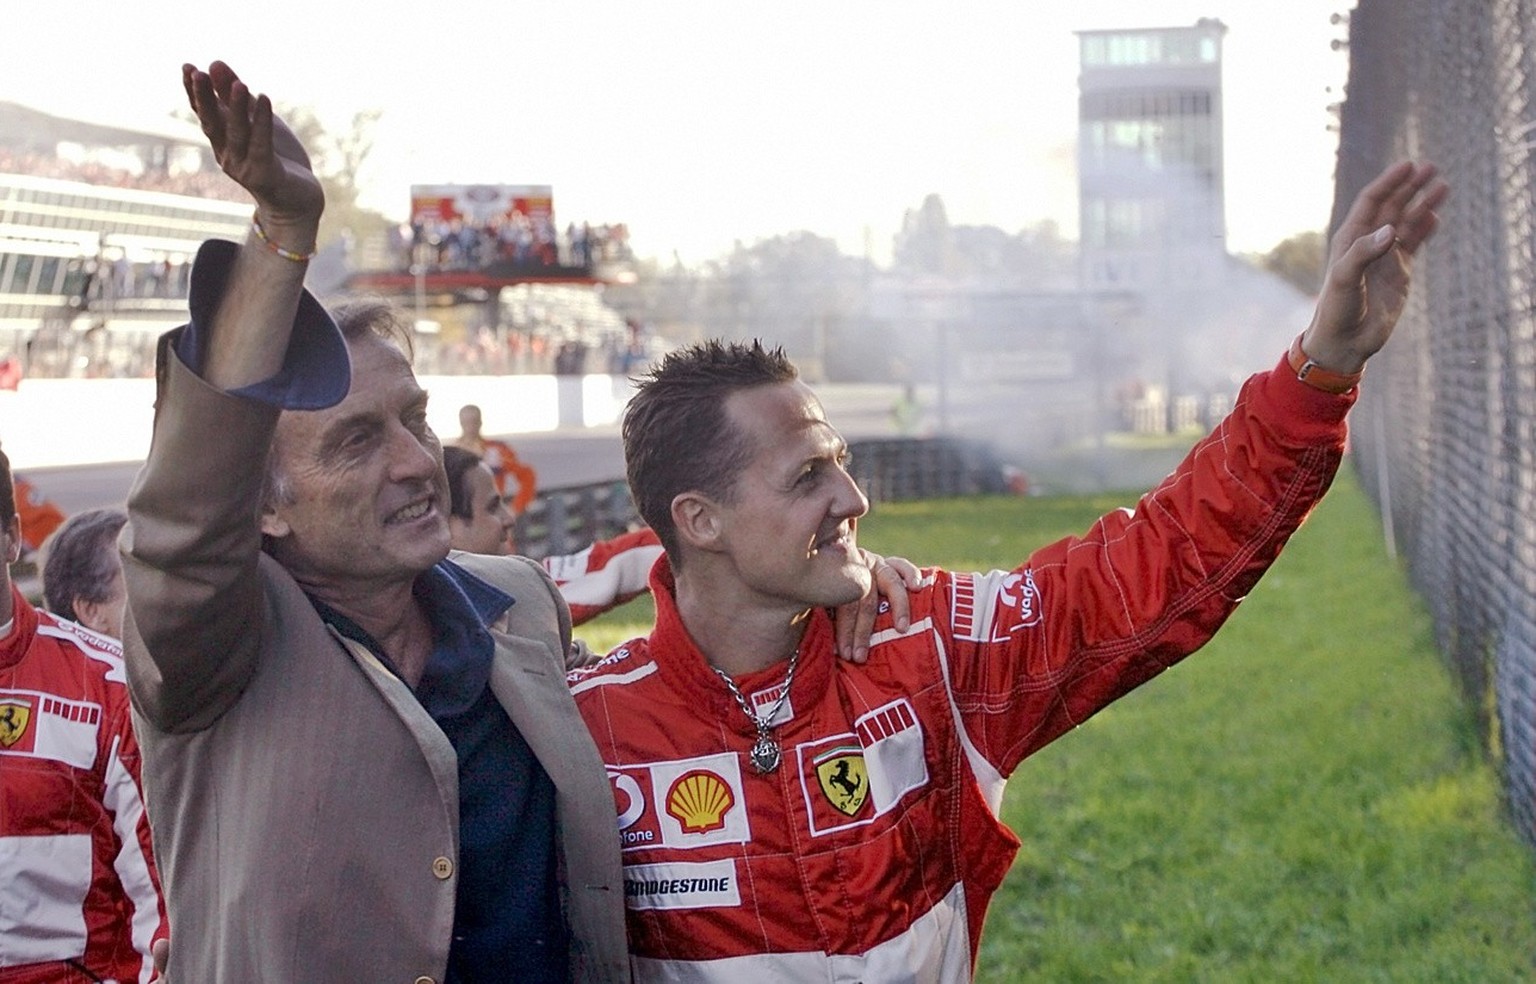 Germany&#039;s Michael Schumacher and Ferrari &#039;s president Luca Di Montezemolo, left, wave to Ferrari fans at the Monza racetrack, Italy, during the Ferrari World Finals, the racing team&#039;s t ...